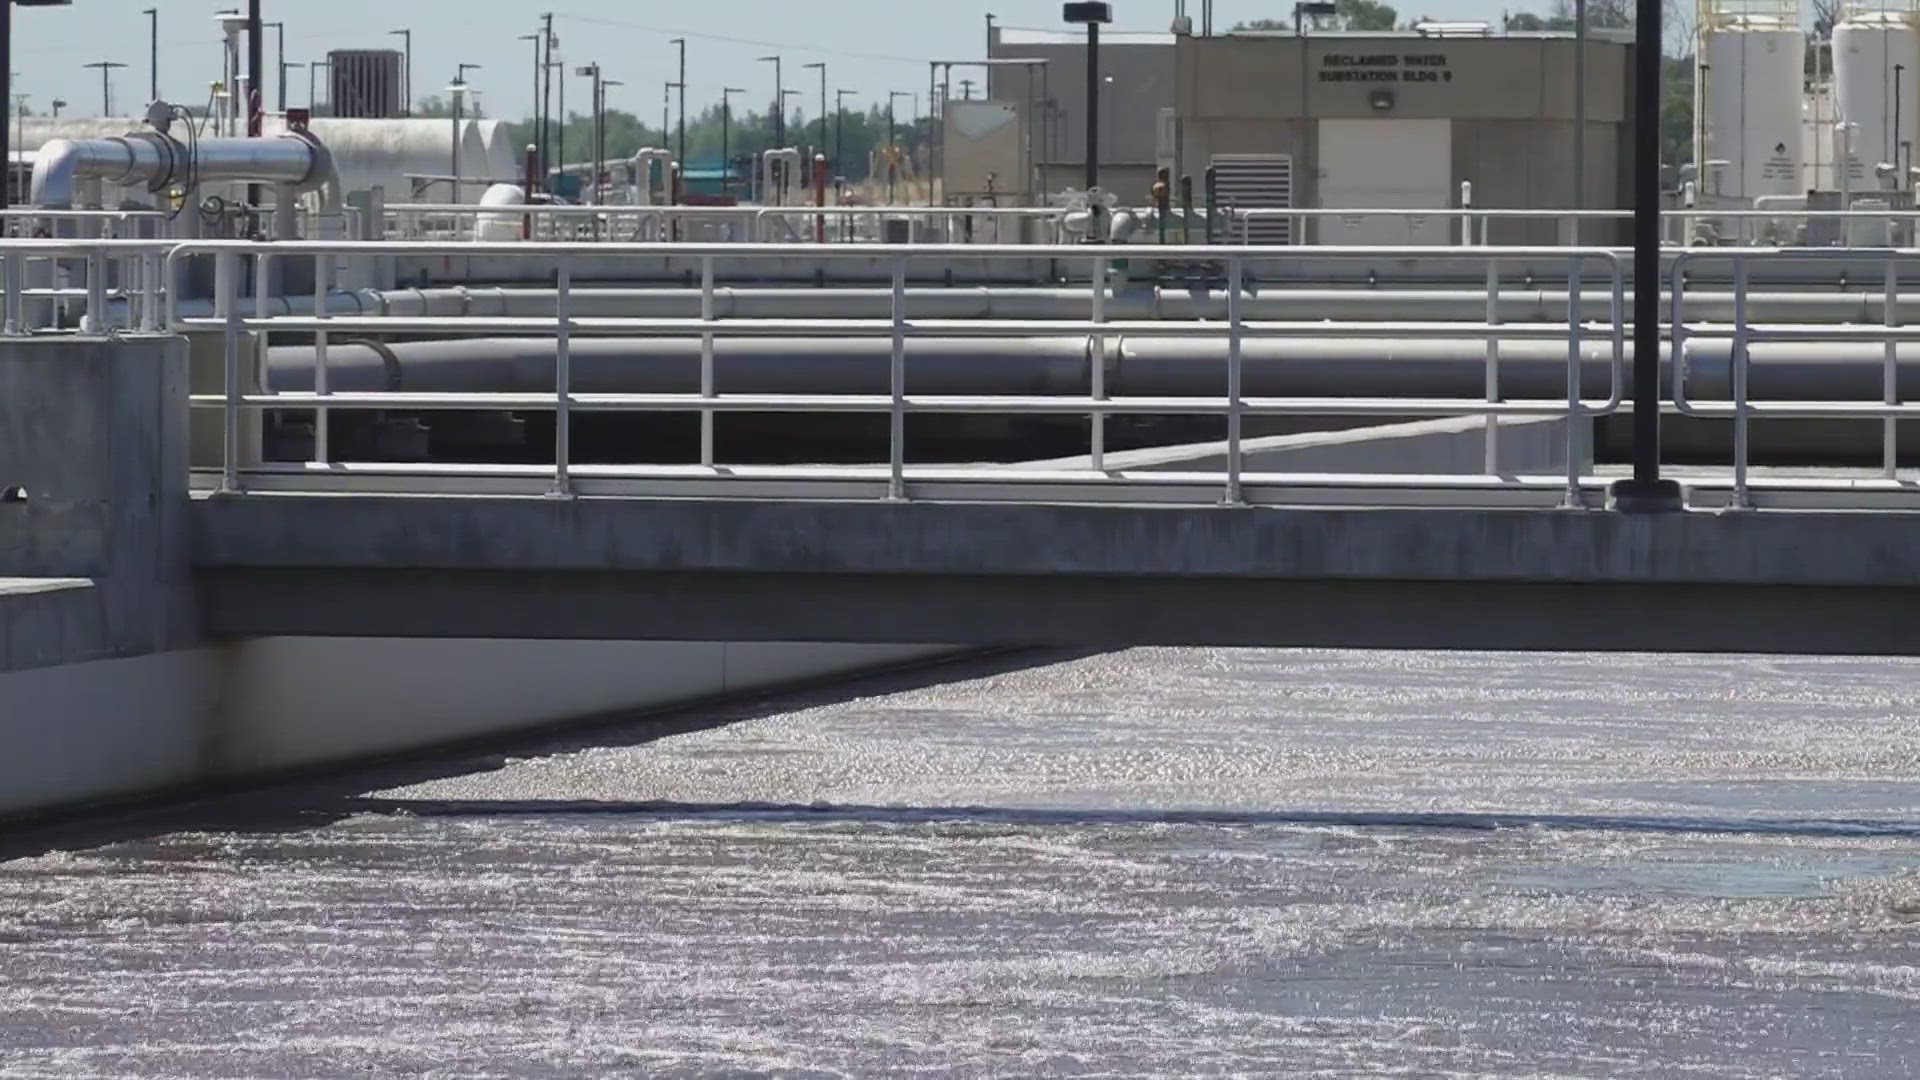 The EchoWater Project, a $1.7 billion upgrade to an existing wastewater plant, is expected to improve the health of the delta and improve groundwater storage